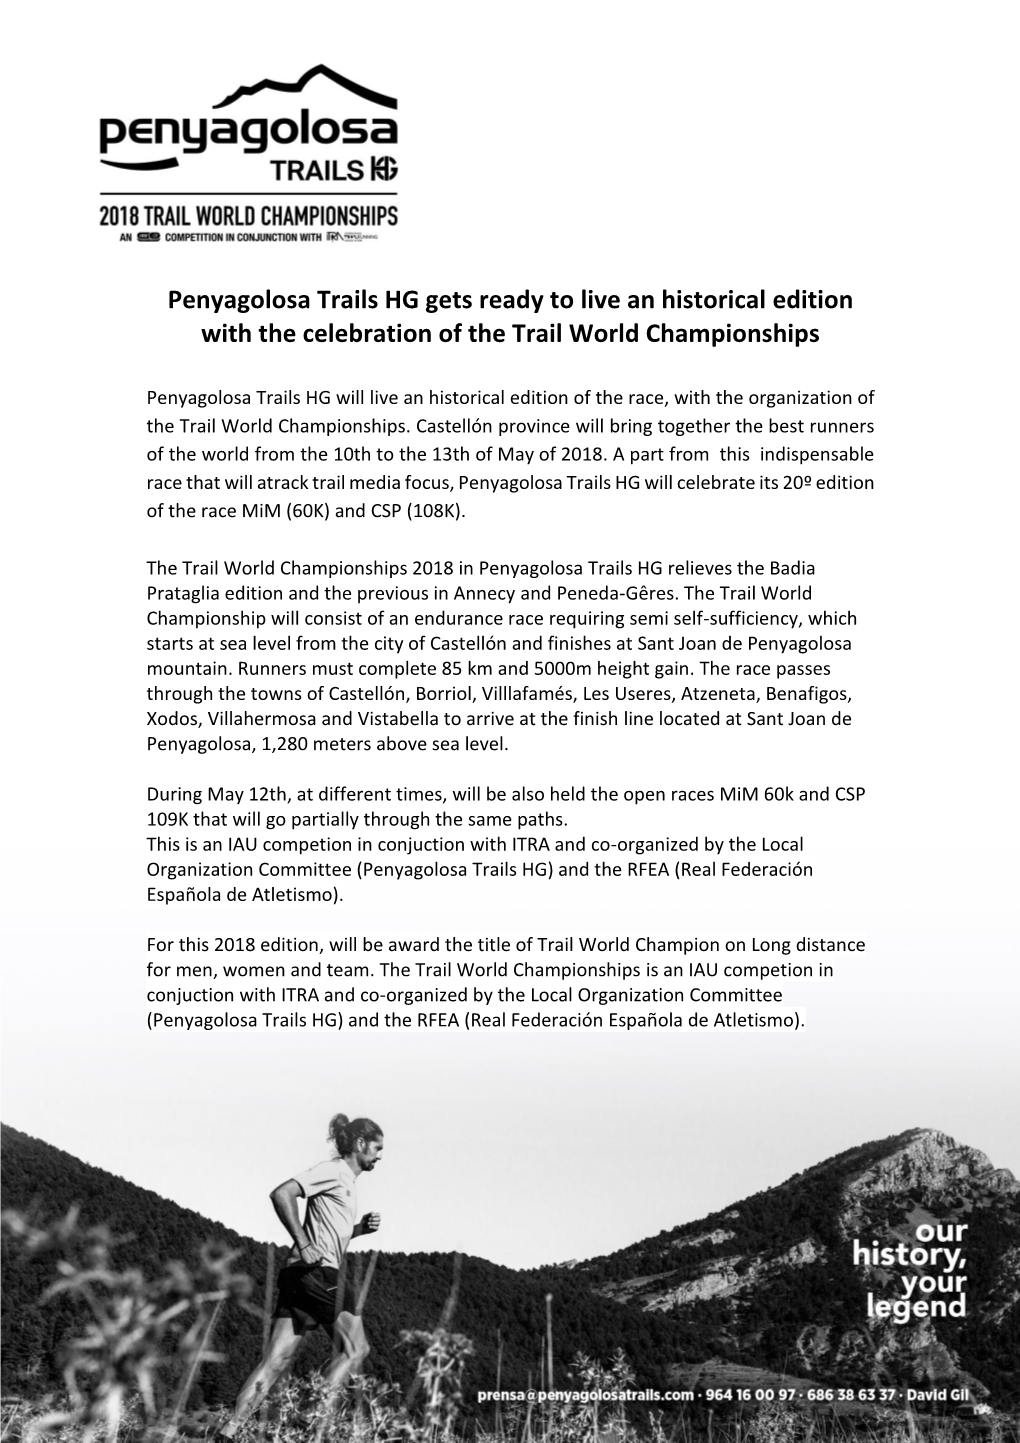 Penyagolosa Trails HG Gets Ready to Live an Historical Edition with the Celebration of the Trail World Championships